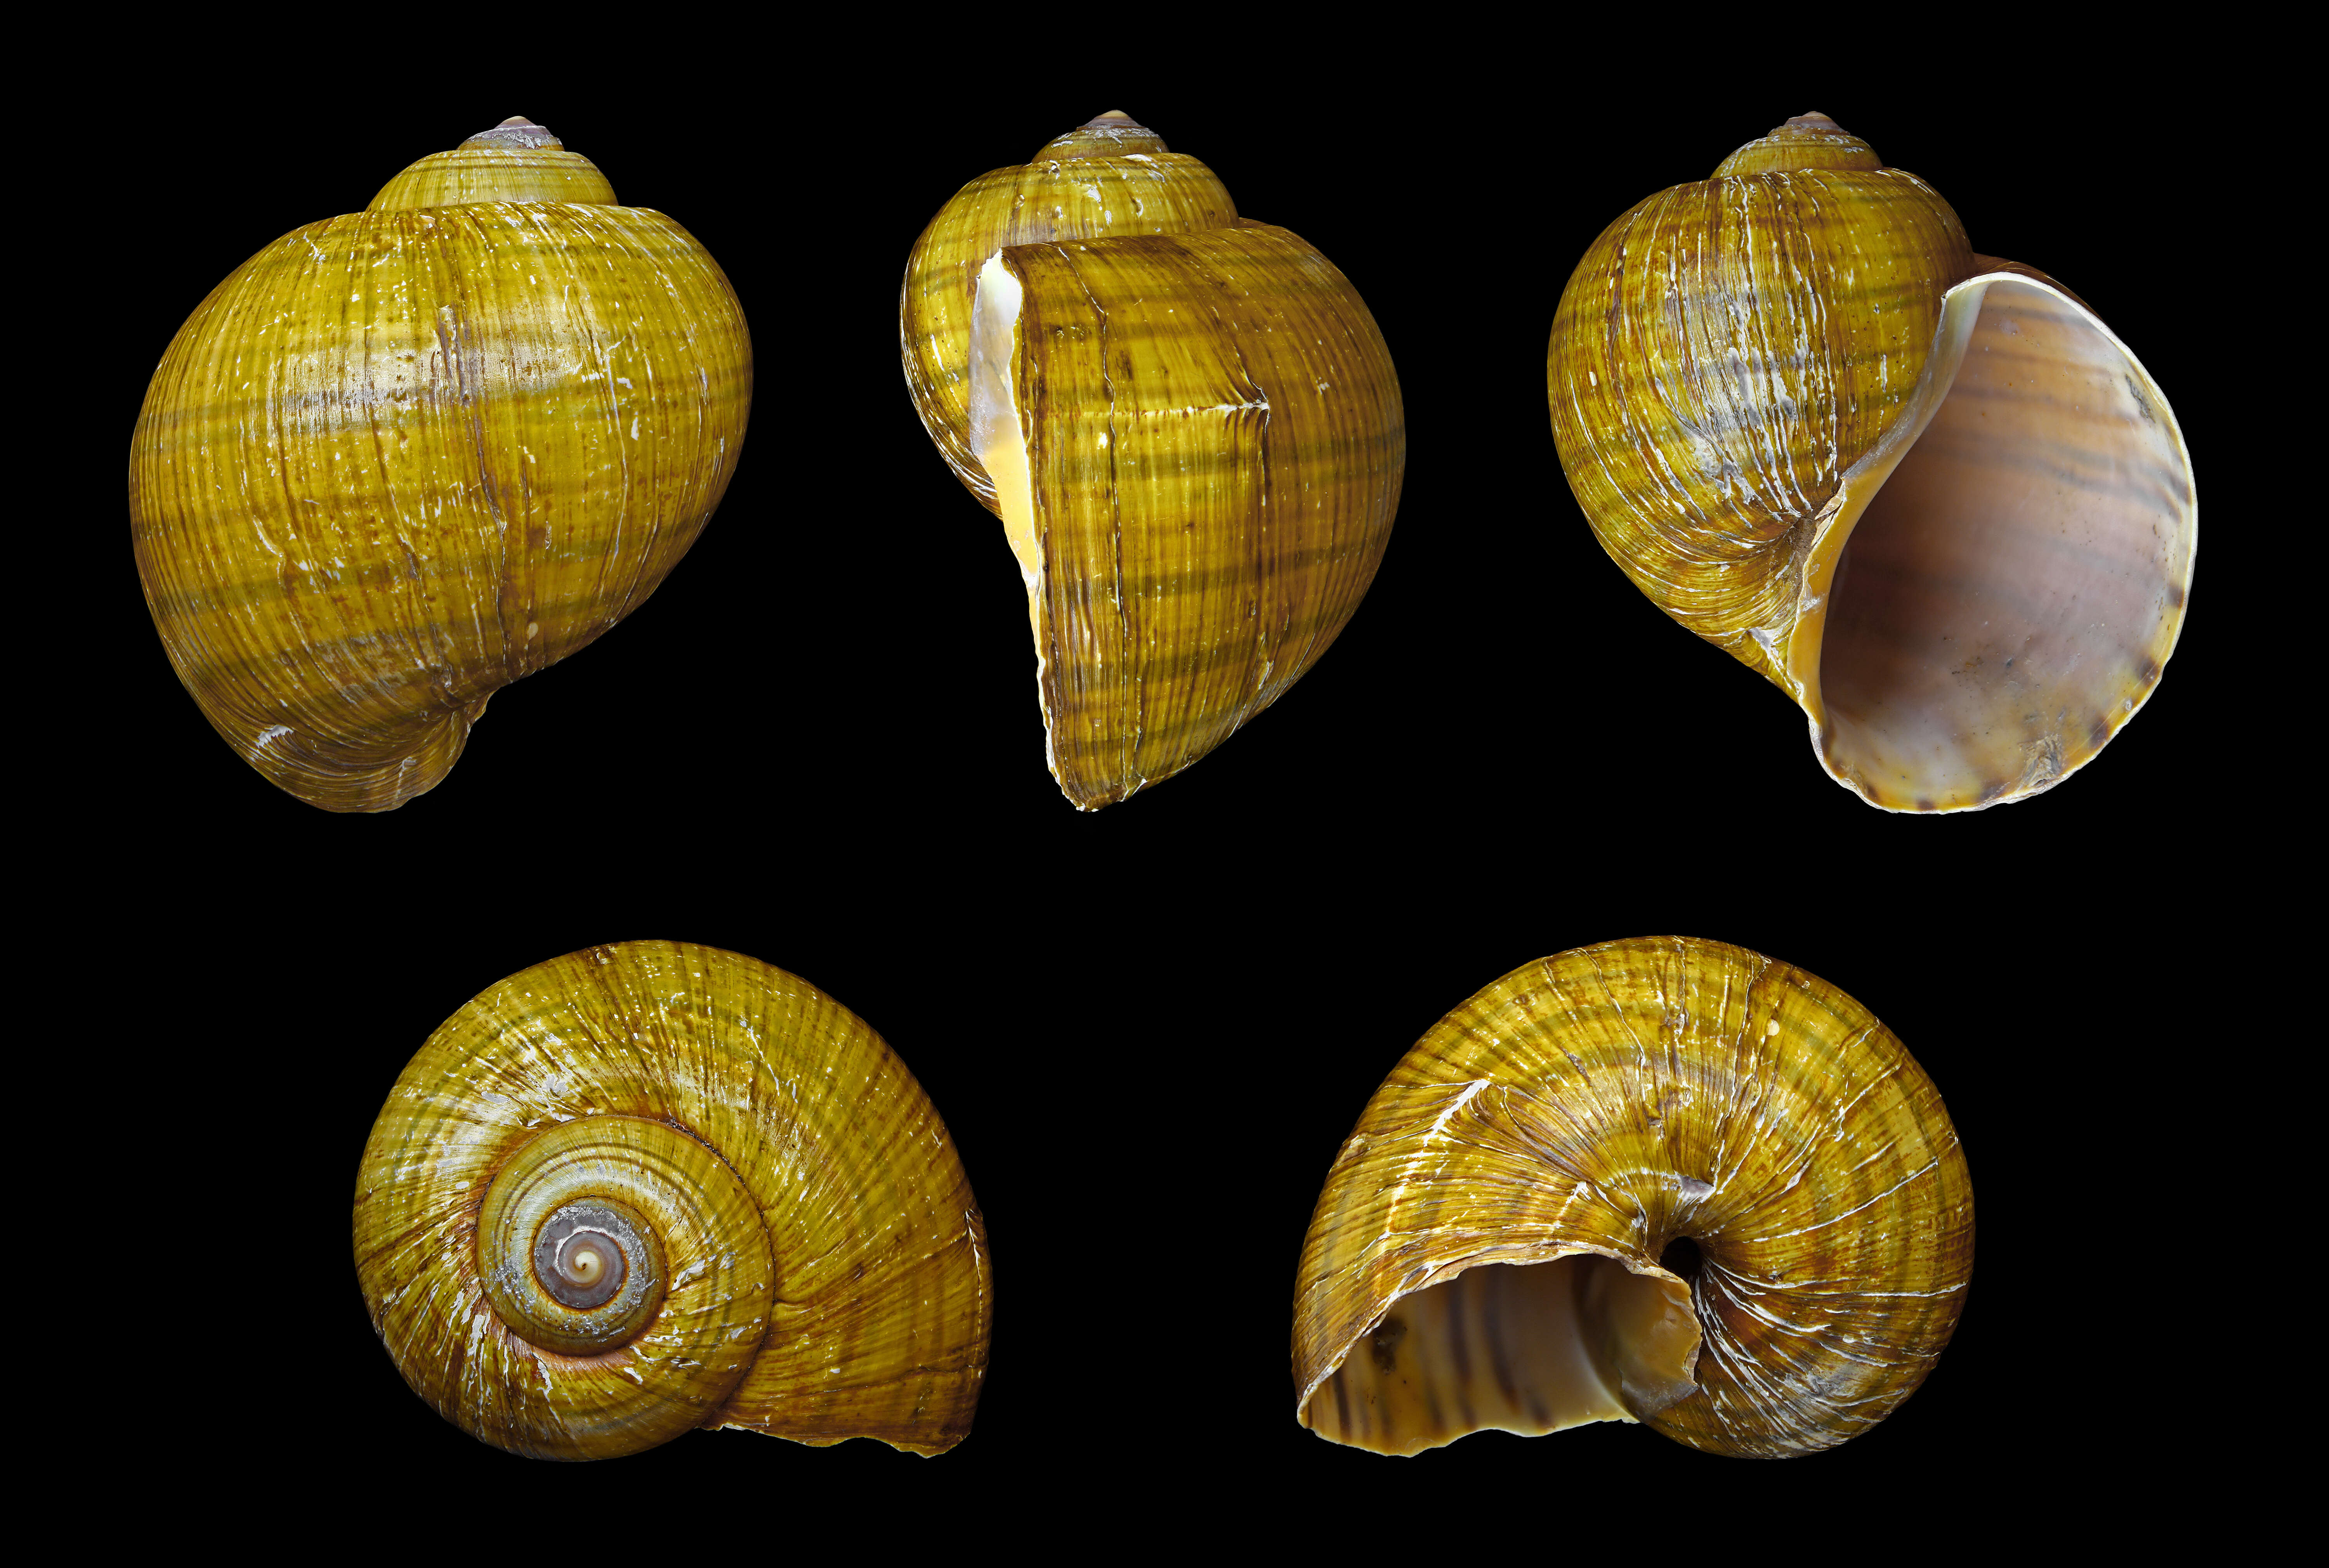 Image of Channeled Applesnail